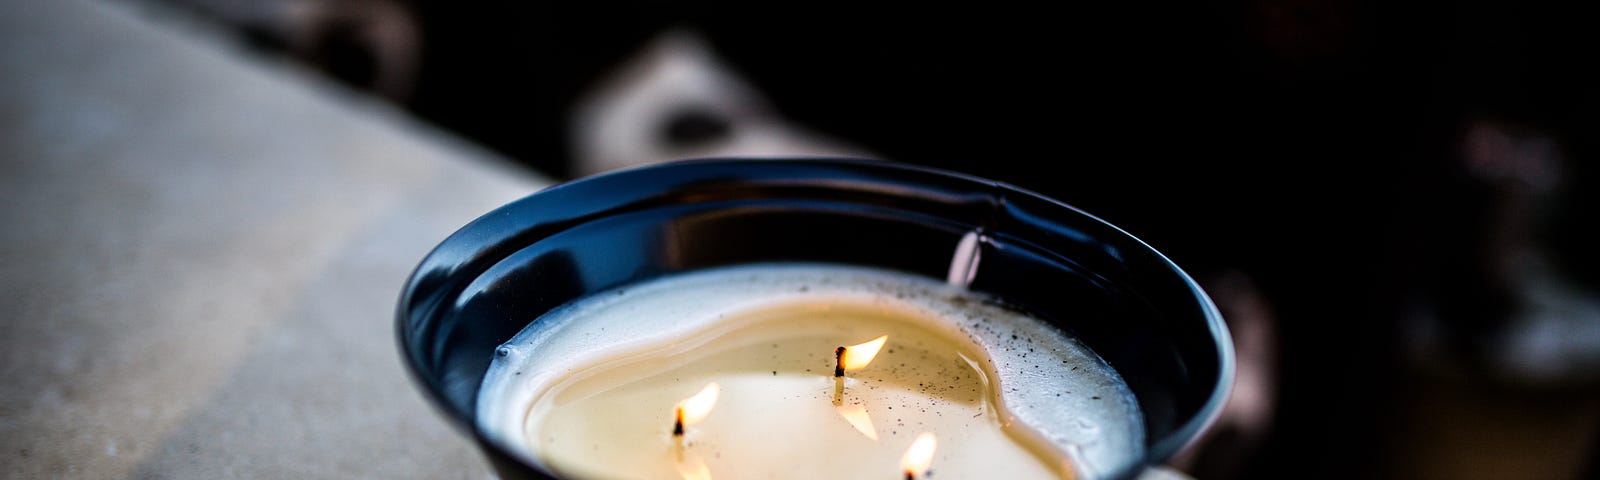 candle with three wicks in a black/blue bowl